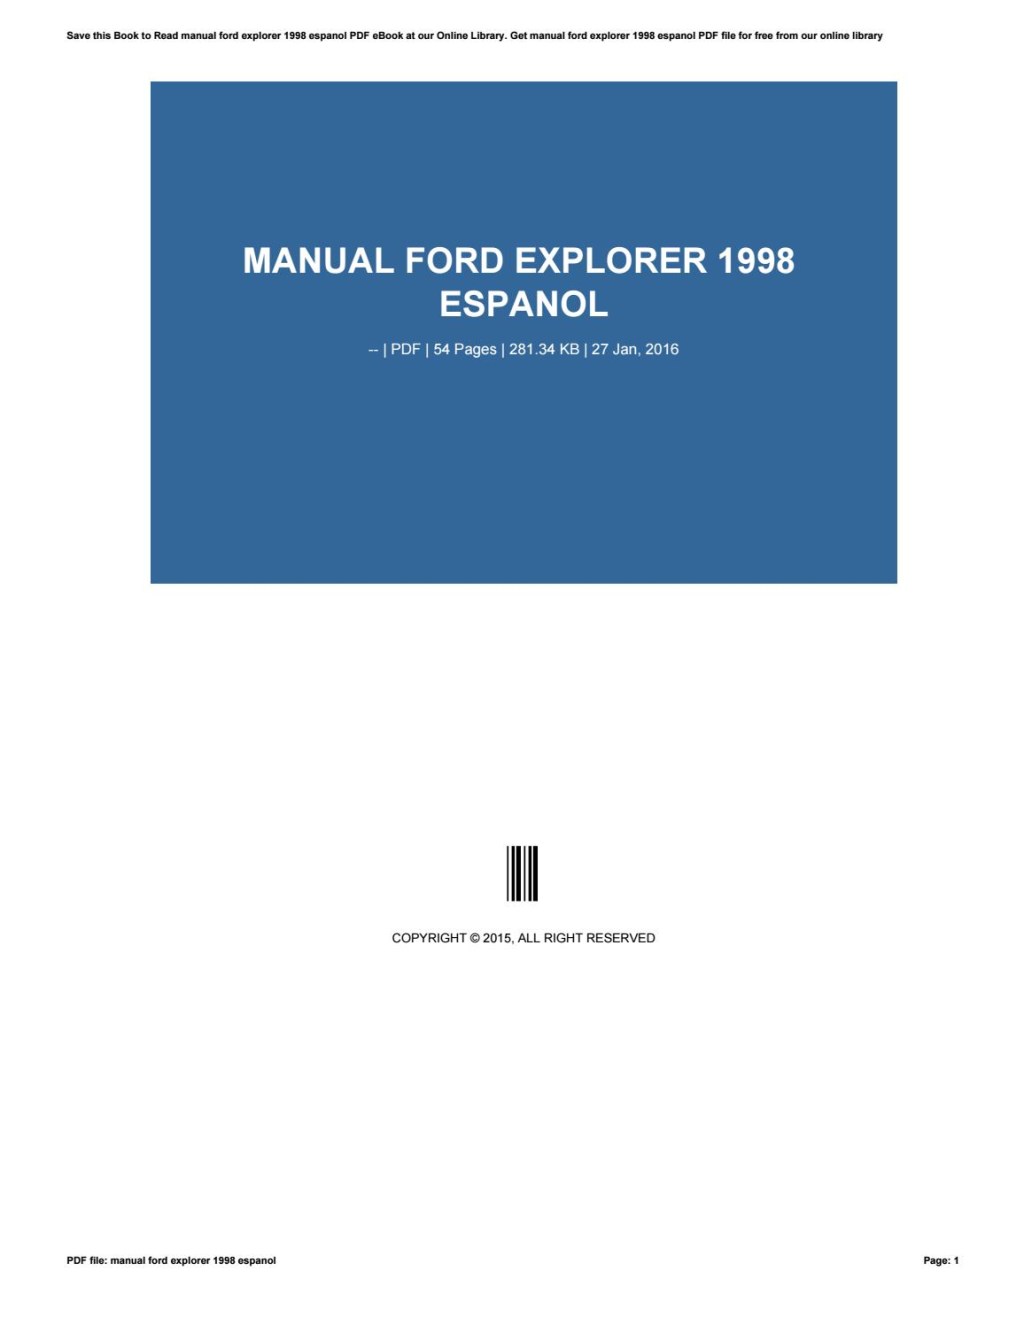 Picture of: Manual ford explorer  espanol by malove – Issuu